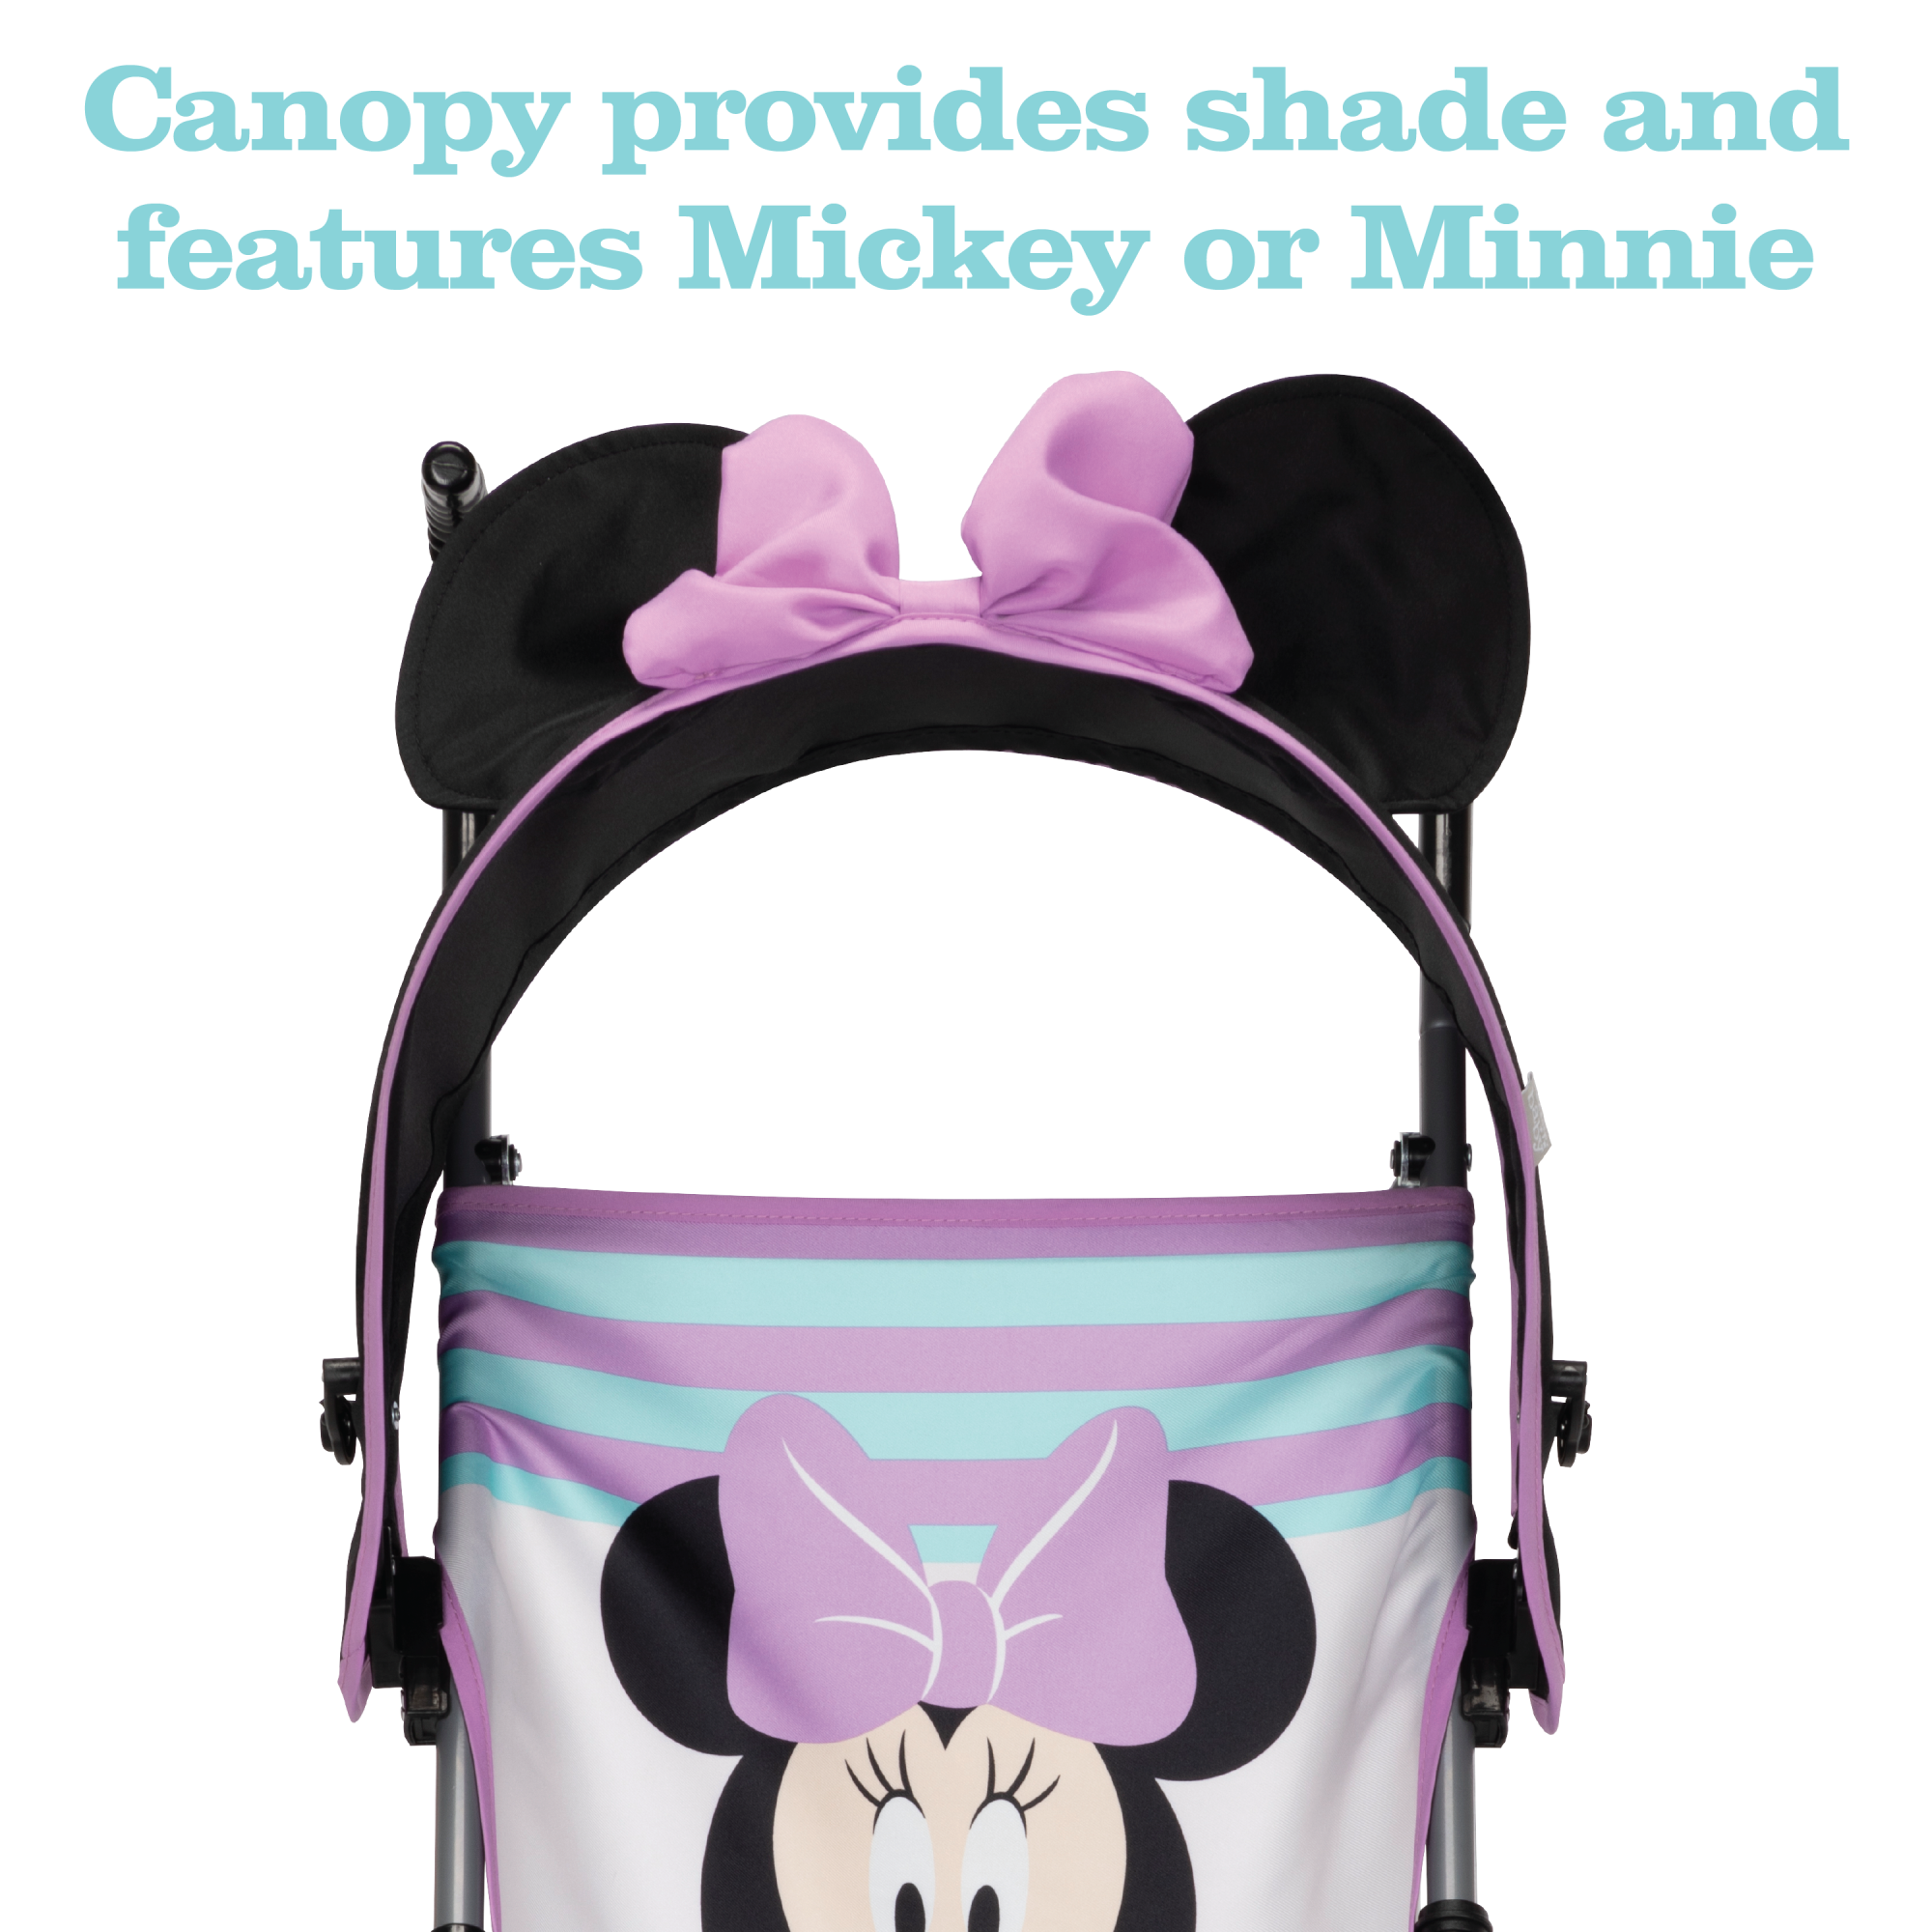 Disney Baby Character Umbrella Stroller - easy to pack for trips